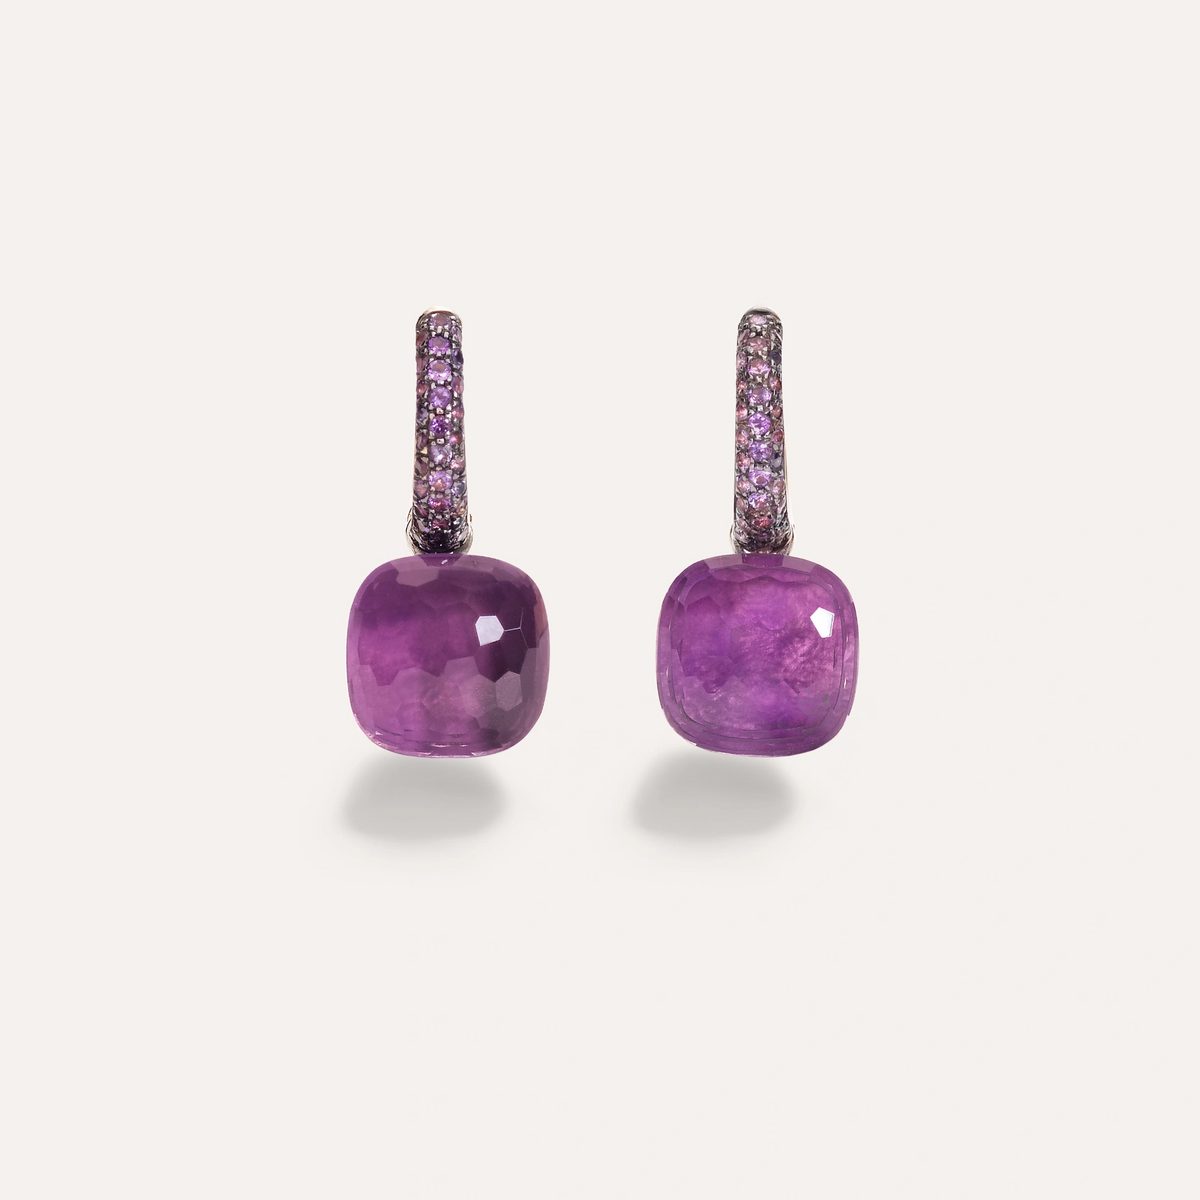 Nudo Drop Earrings in 18k Rose and White gold with jade and amethyst